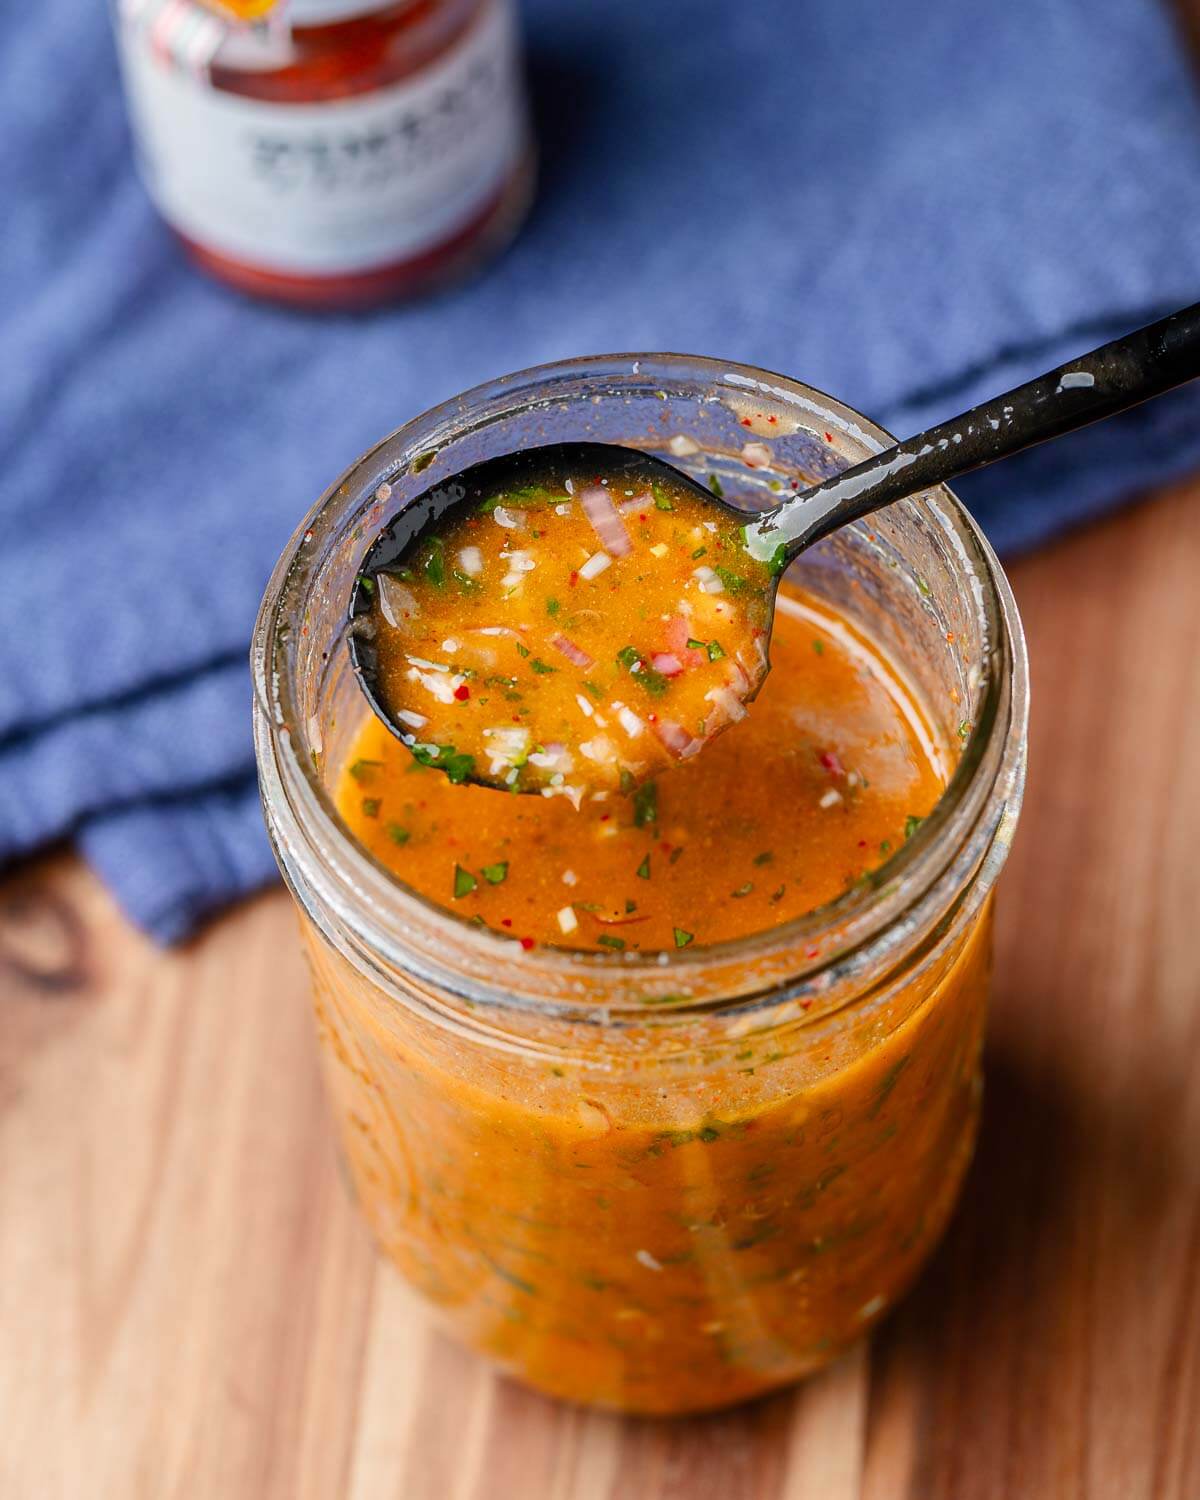 Pouring spoonful of dressing over mason jar.